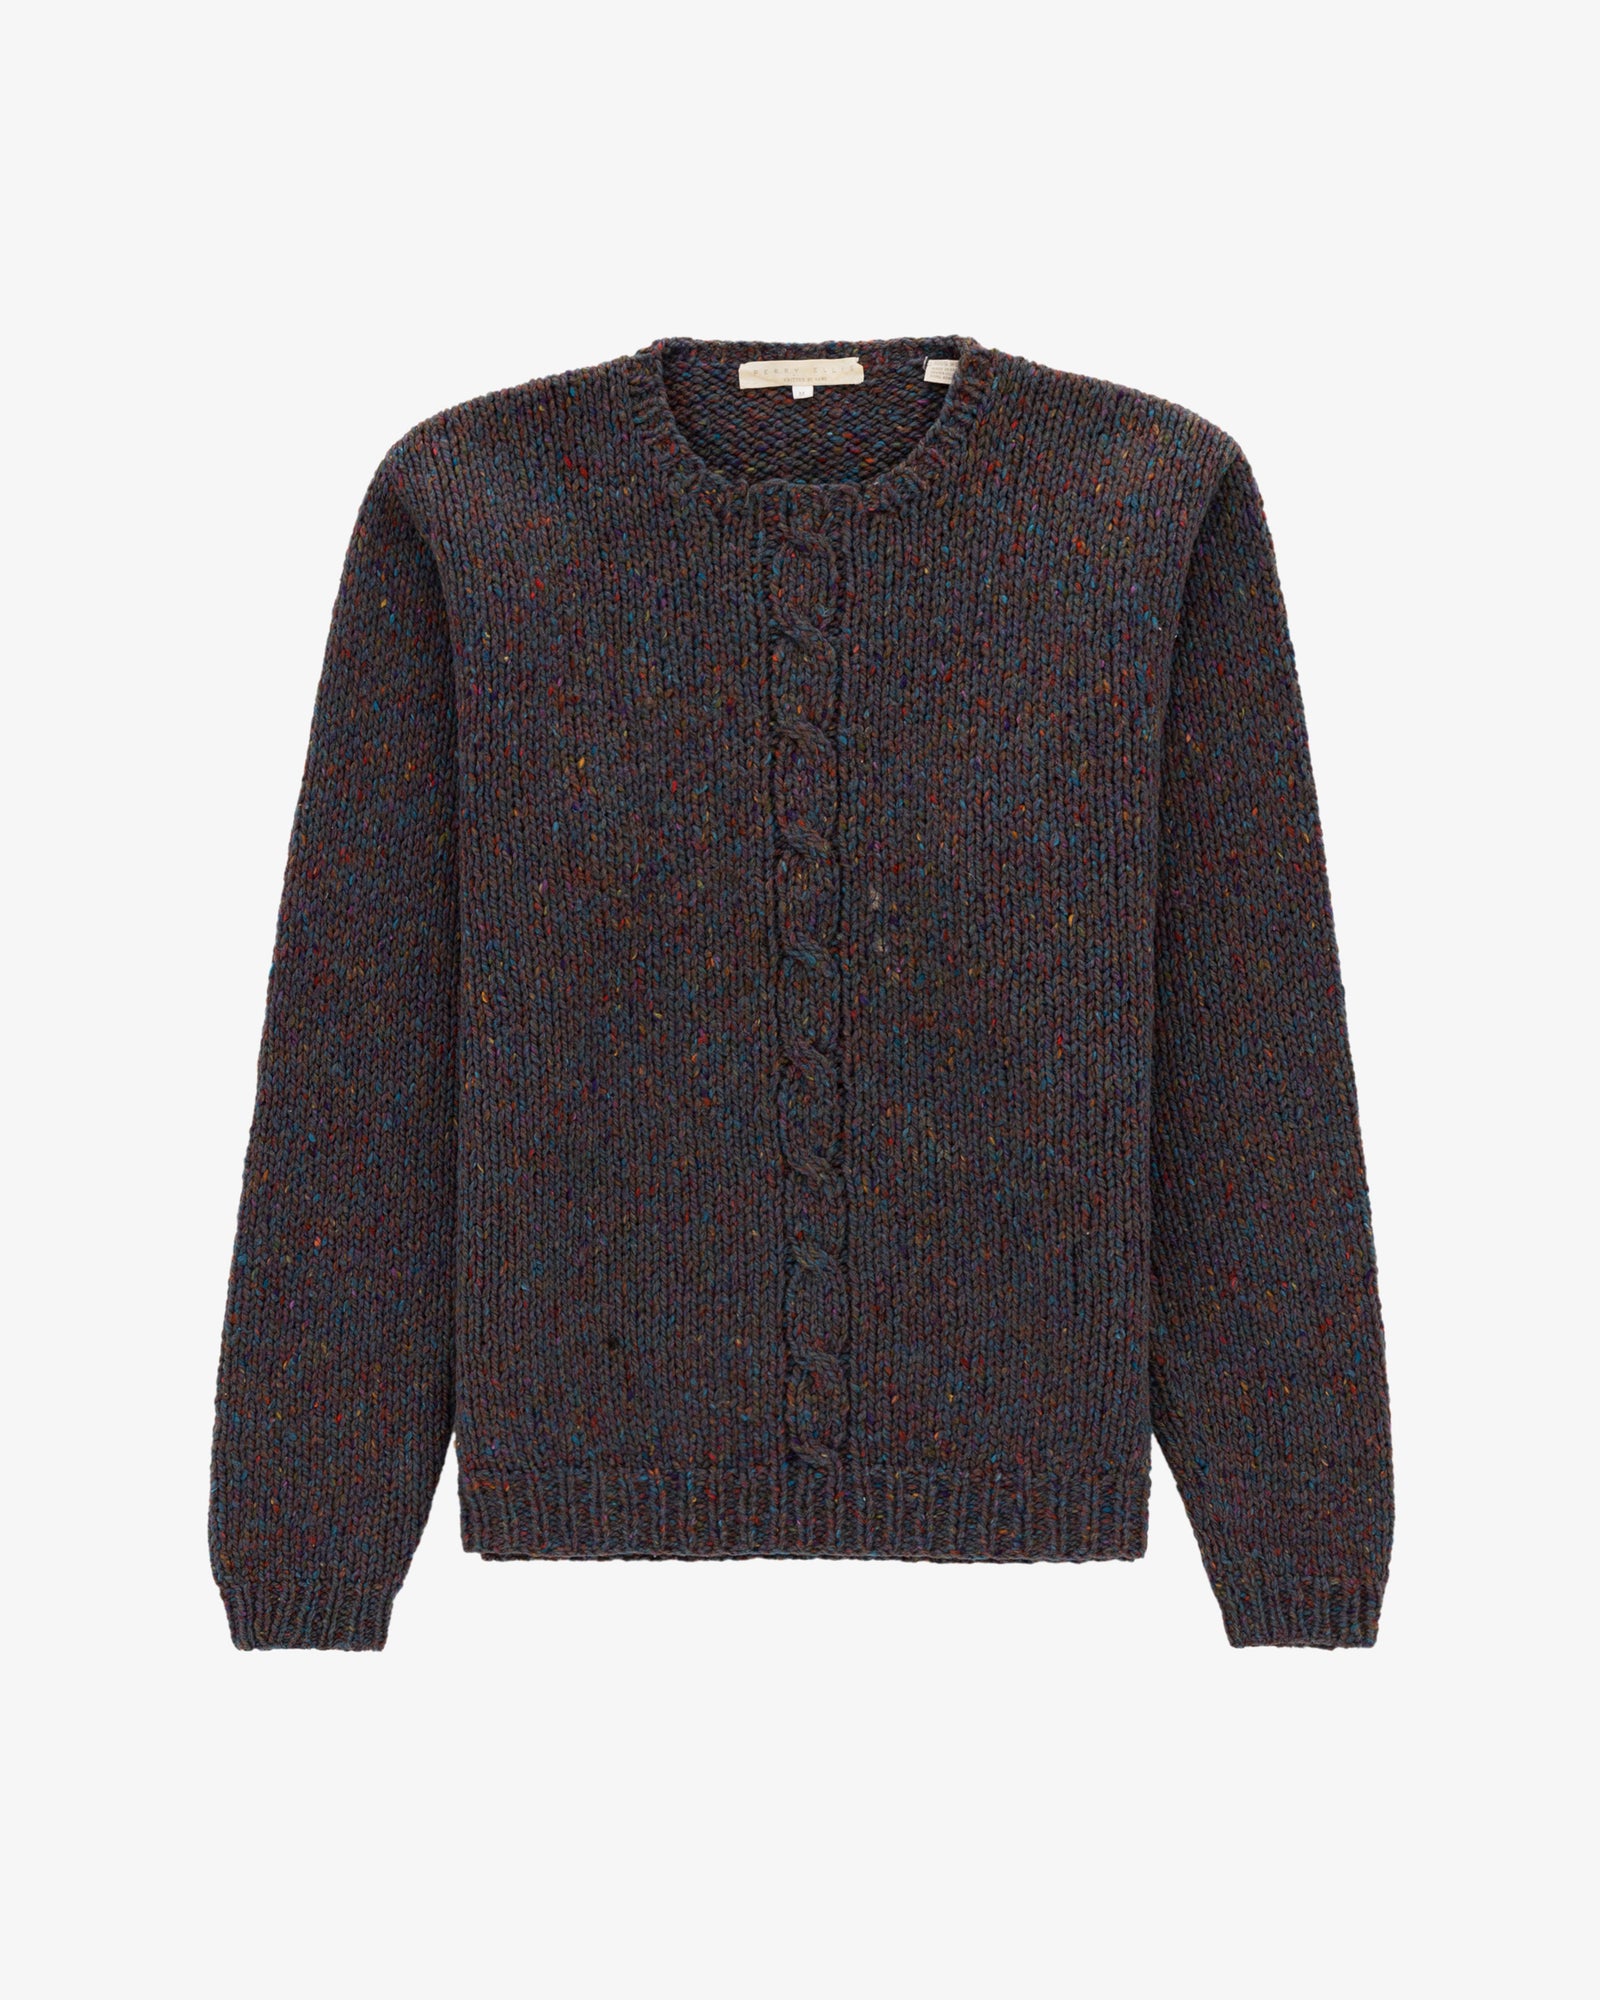 Perry Ellis Hand Knit Multi Color Wool Sweater